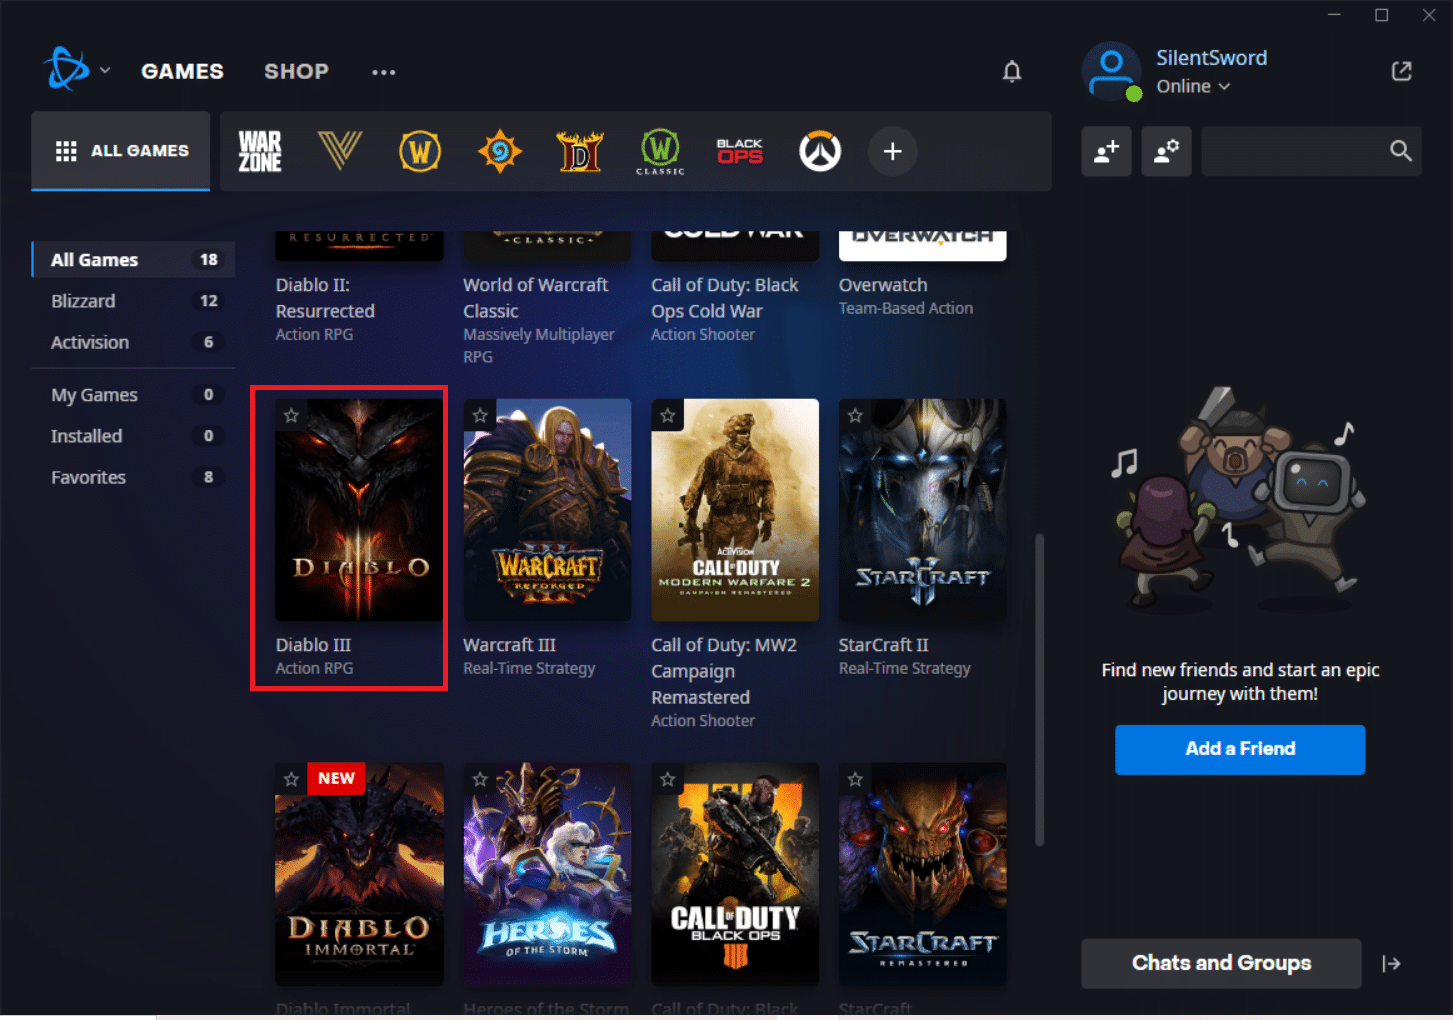 Browse by scrolling down for Diablo 3 and click on it